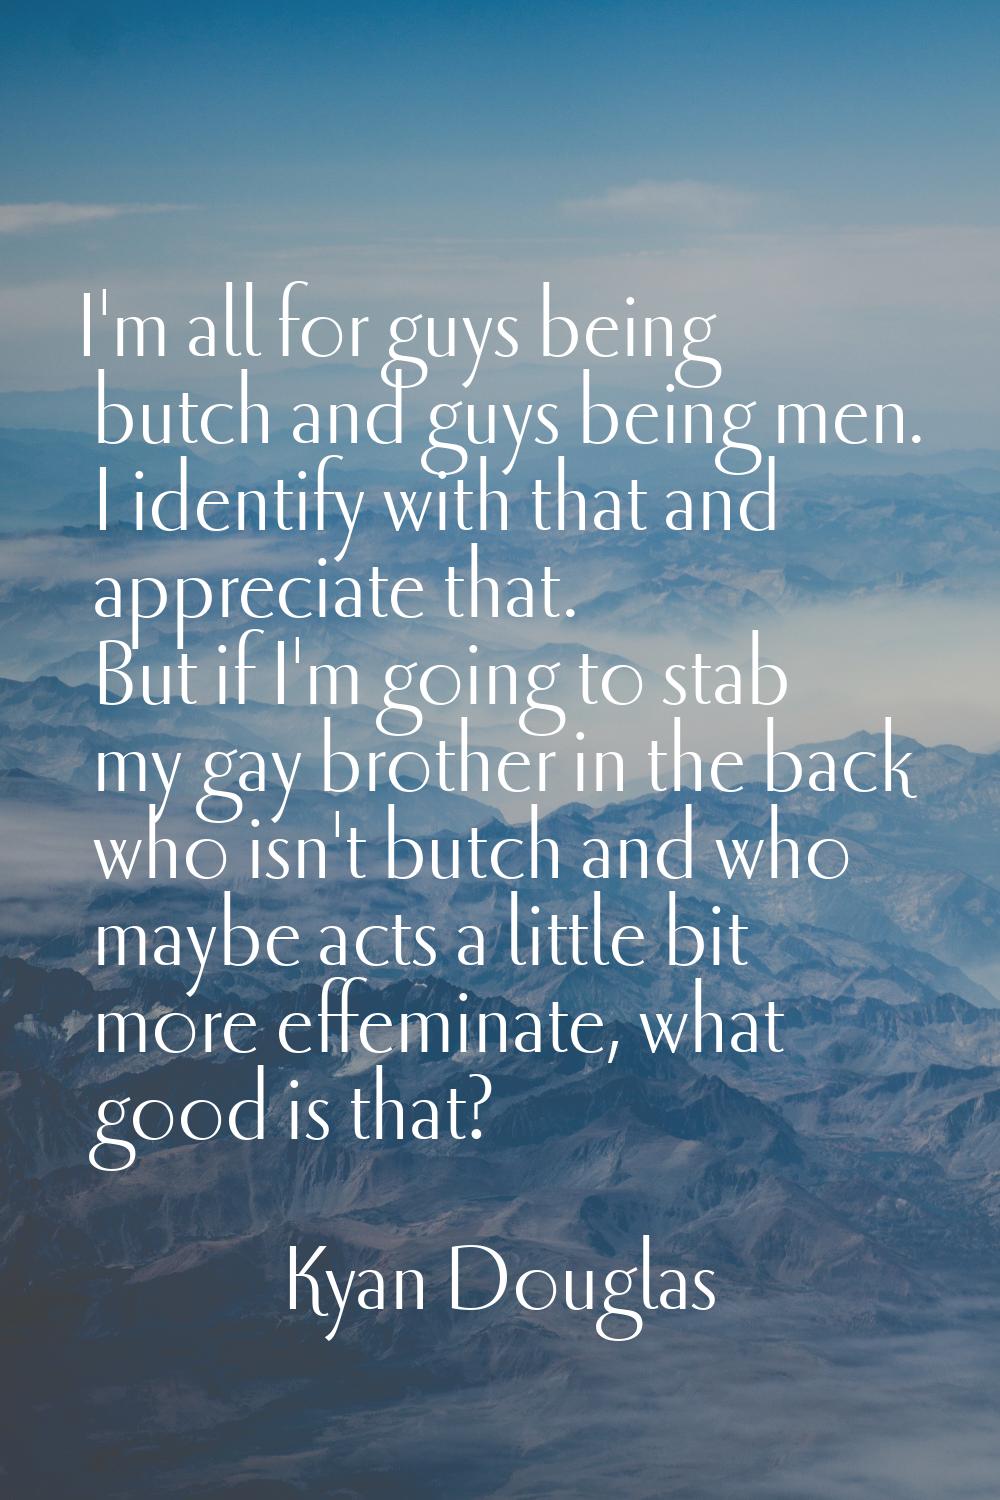 I'm all for guys being butch and guys being men. I identify with that and appreciate that. But if I